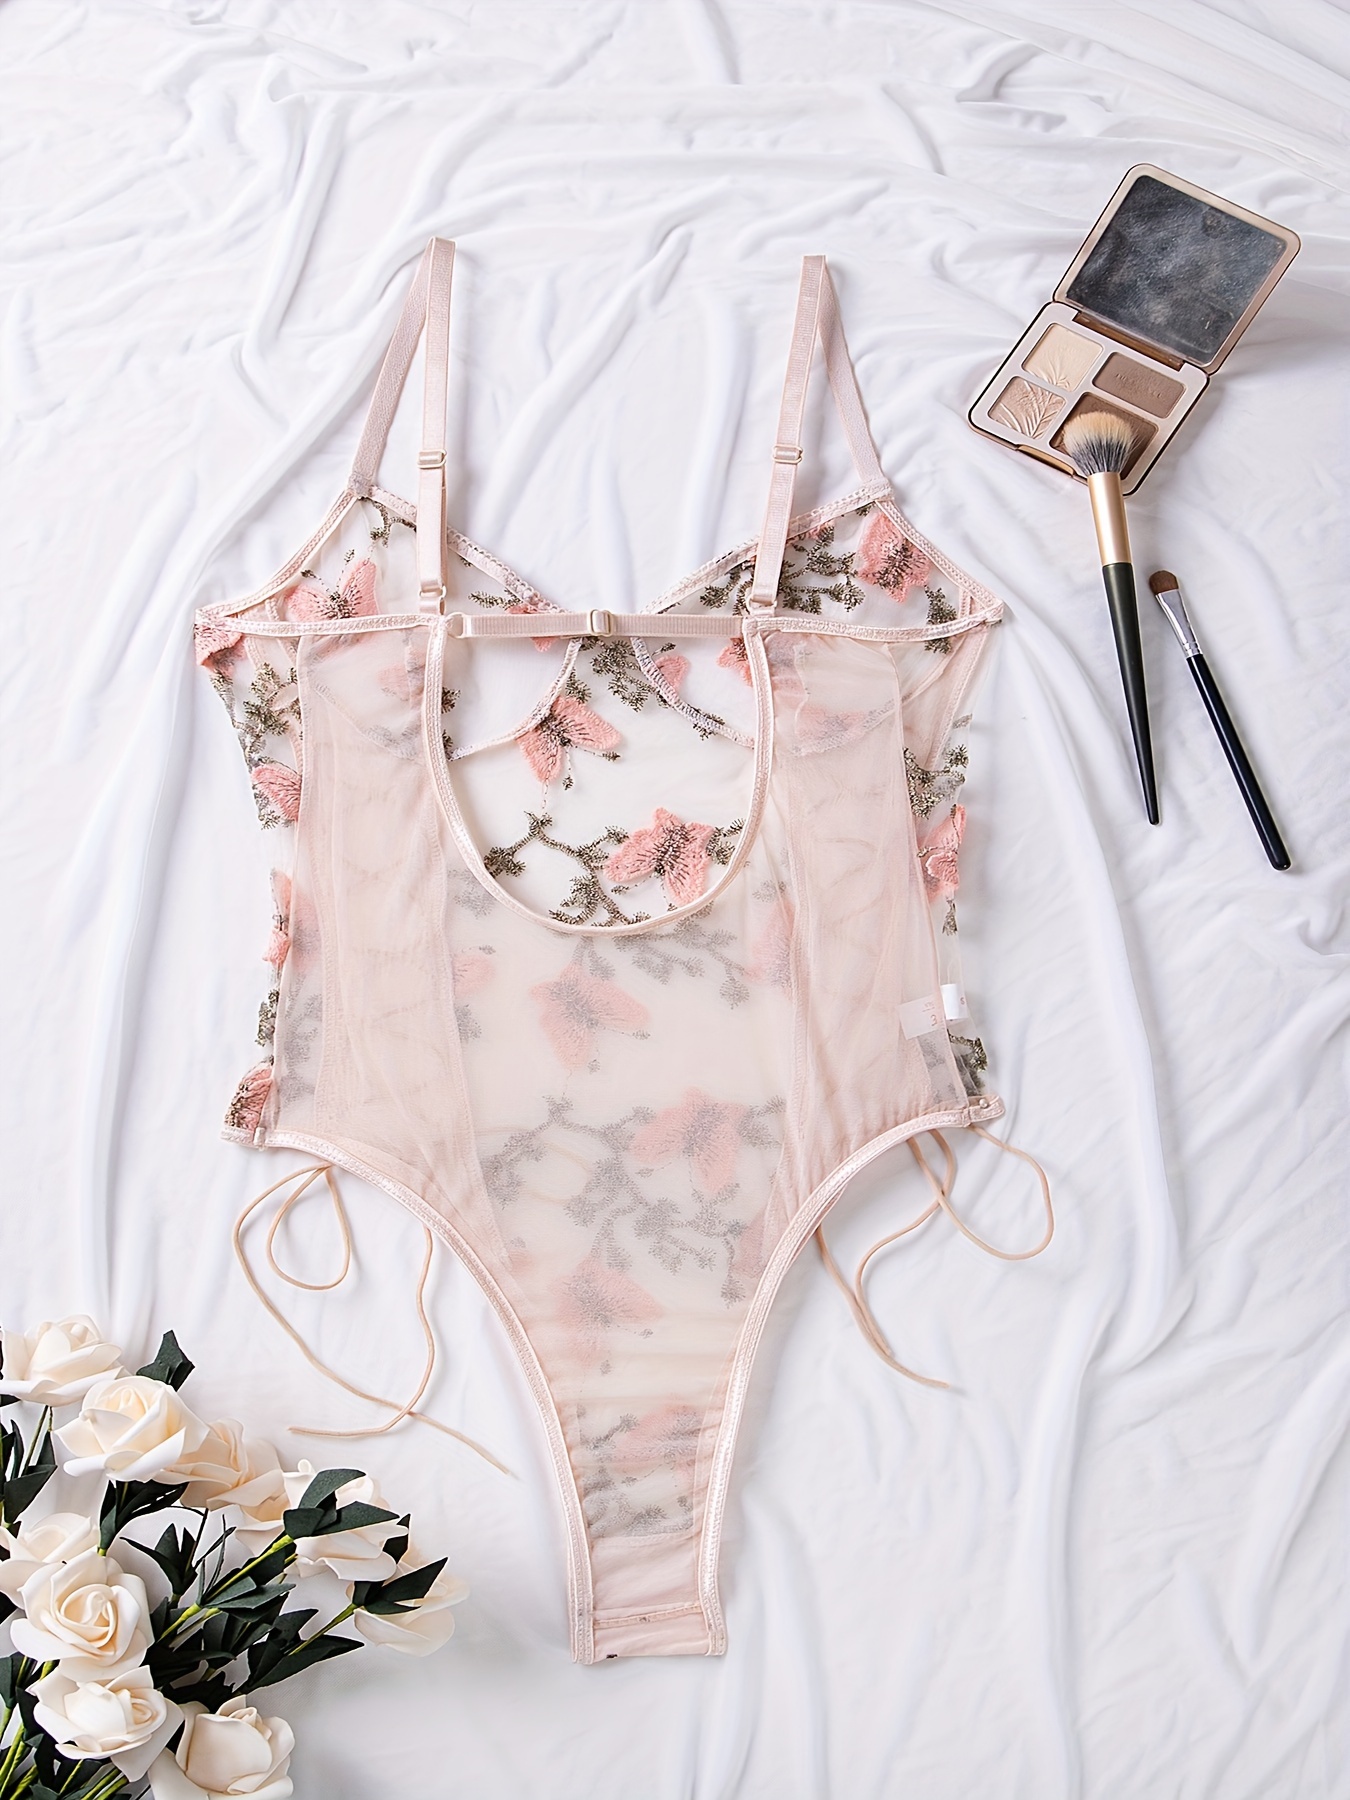 Strappy Butterfly Embroidered Sheer Mesh Lingerie Teddy Sleepwear